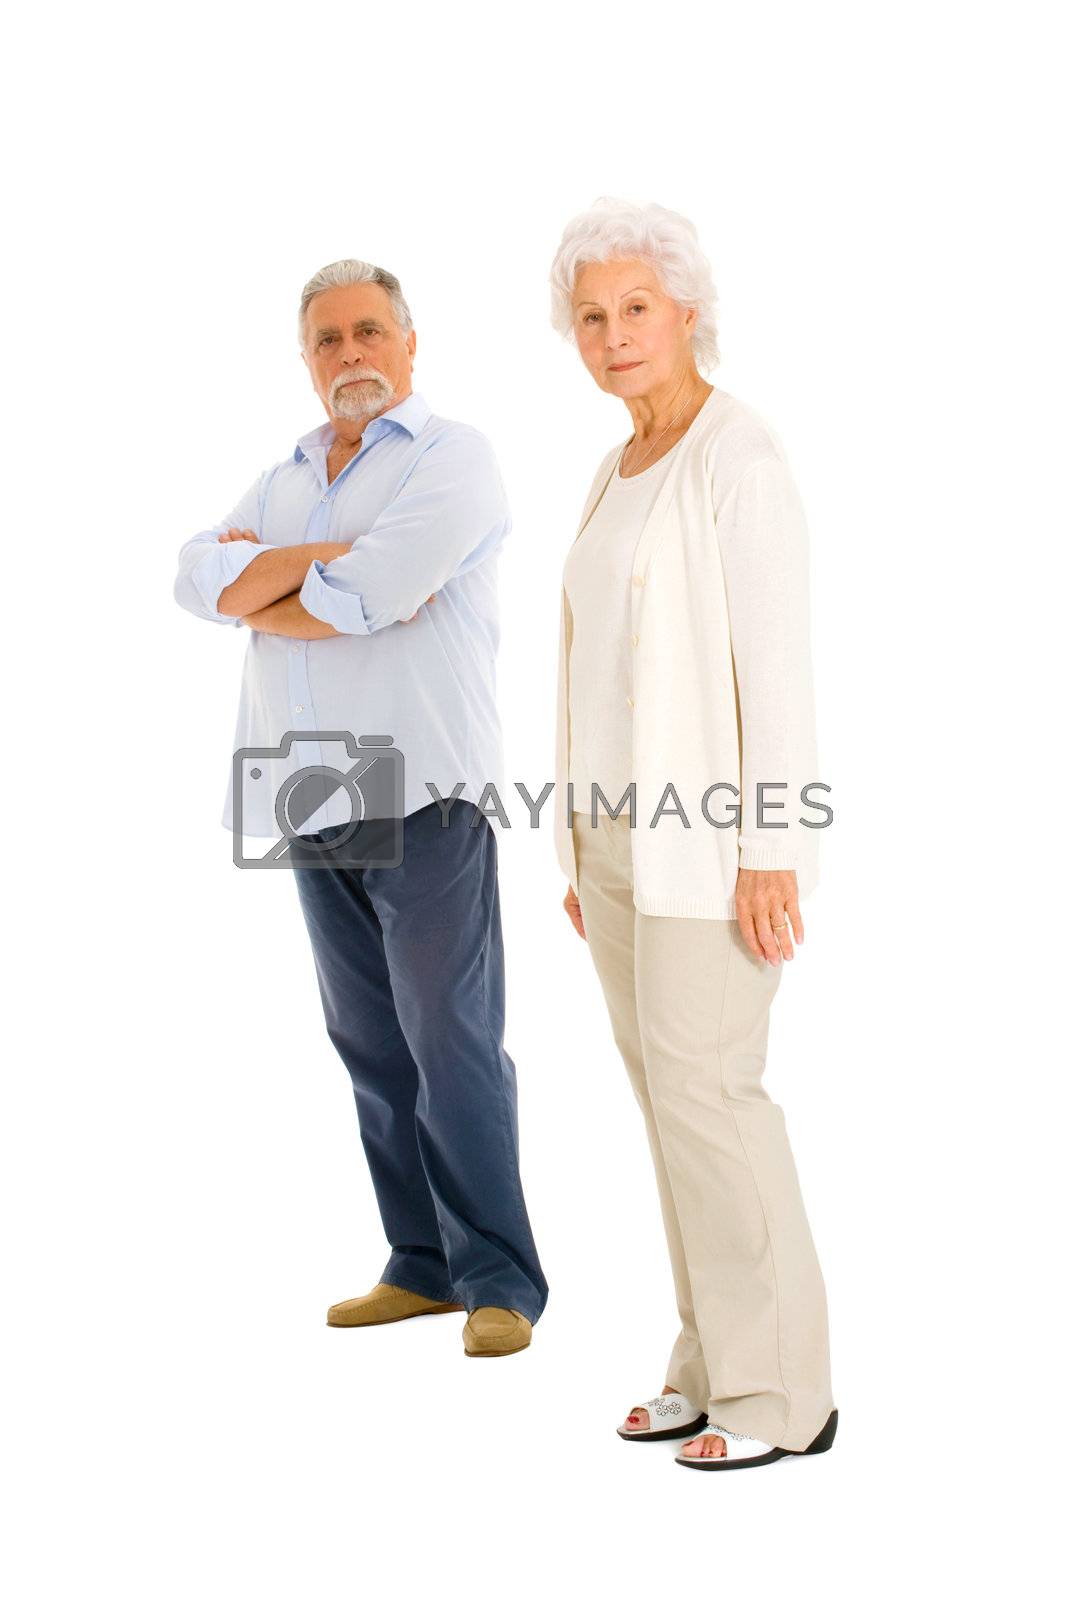 Royalty free image of elderly couple separated by ambro